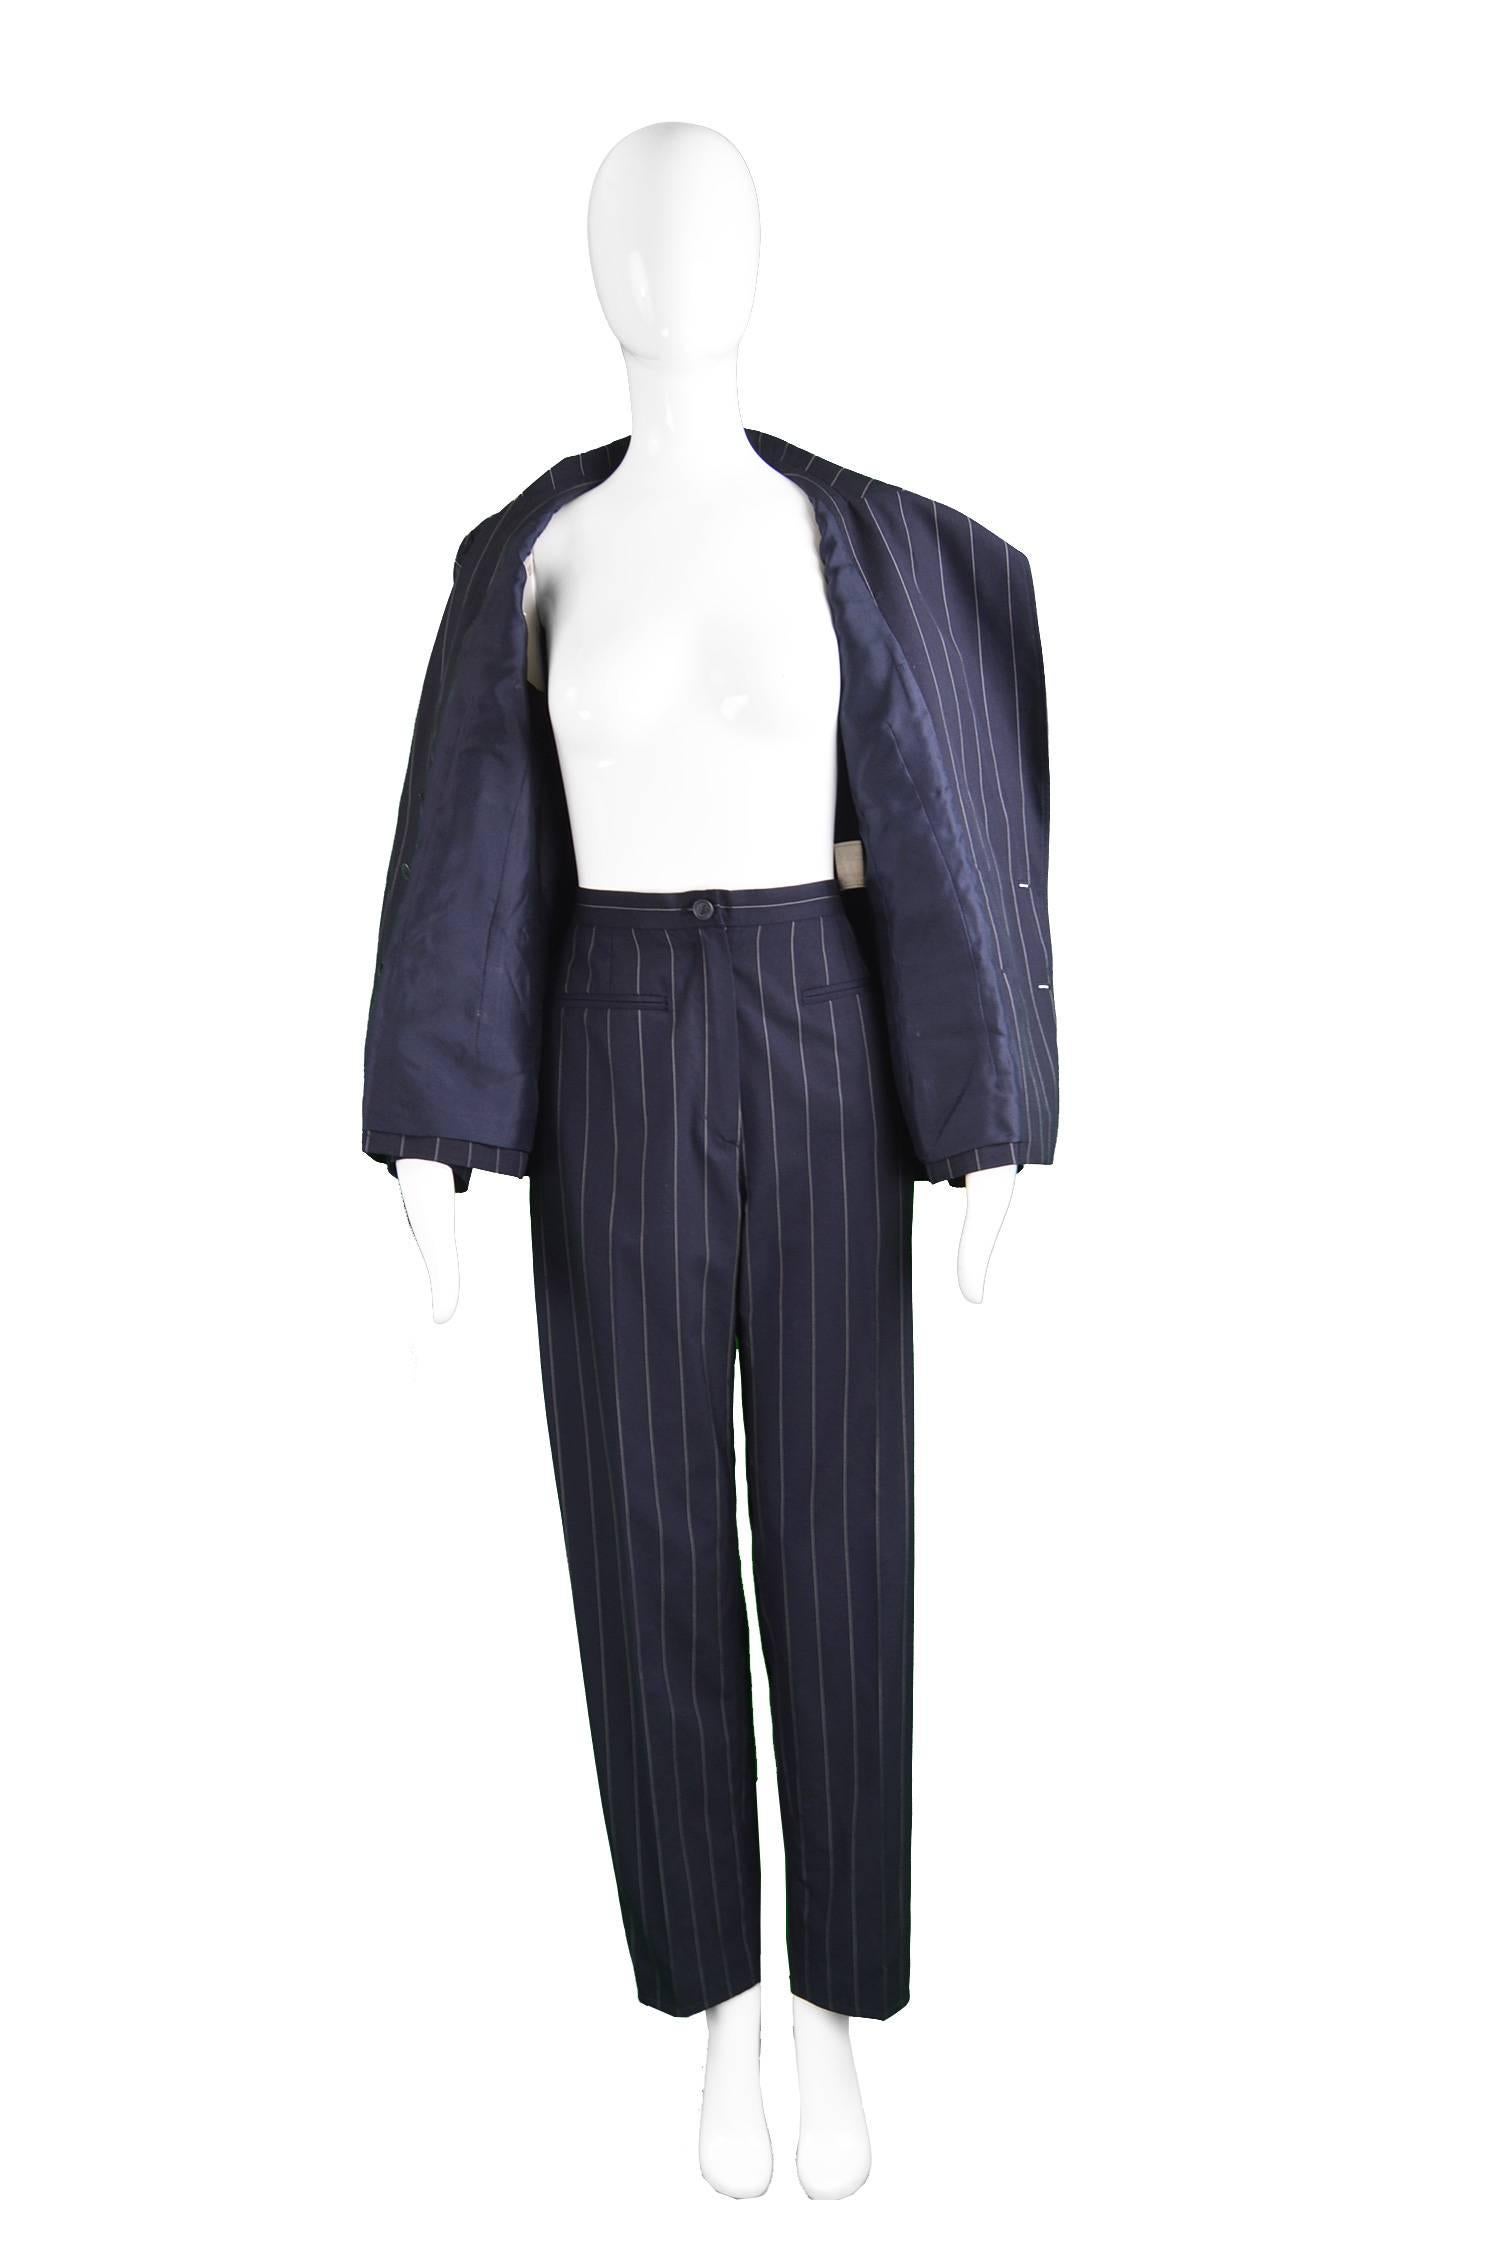 Chanel Womens Vintage Menswear Inspired Pinstripe Pant Suit, S/S 1997 1